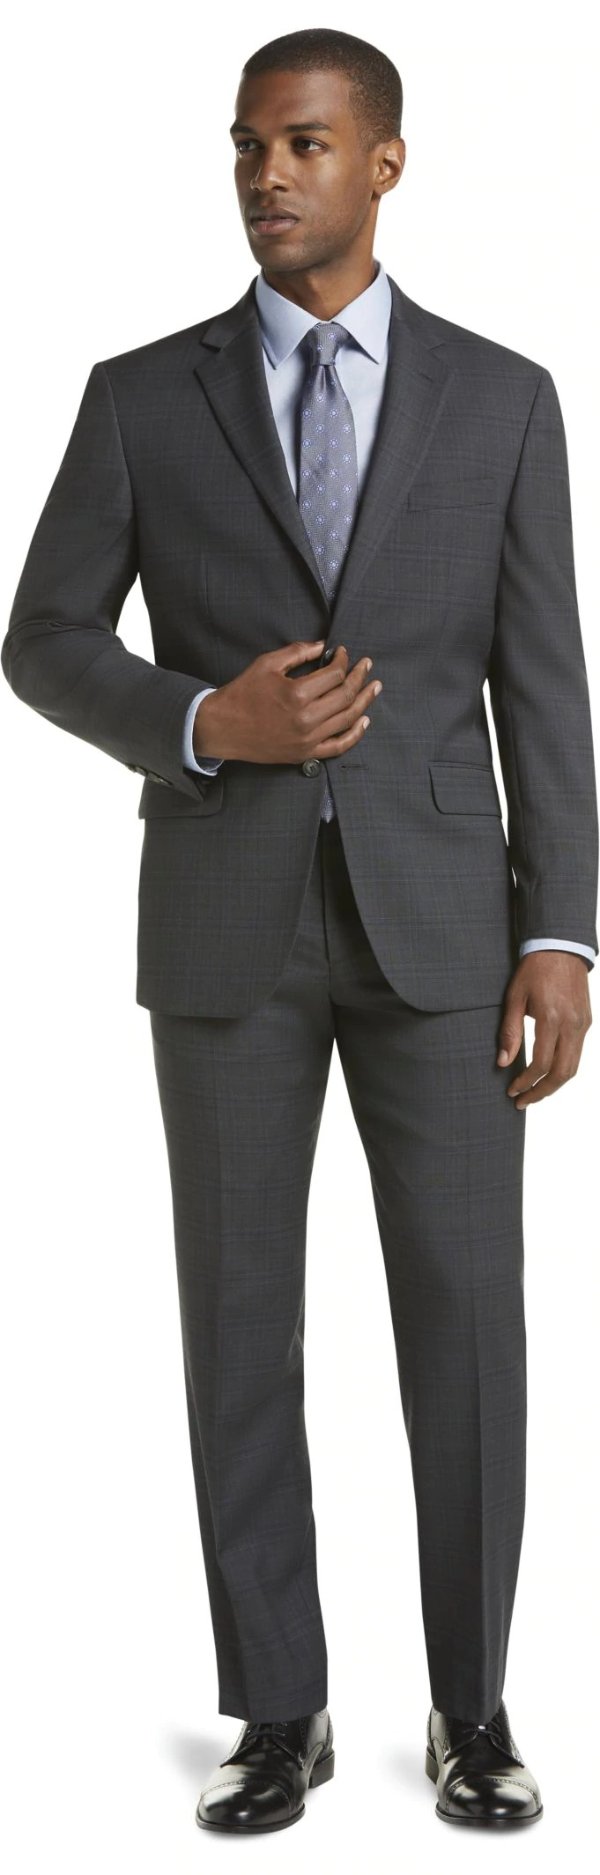 1905 Collection Tailored Fit Plaid Organica® Suit with brrr° Comfort